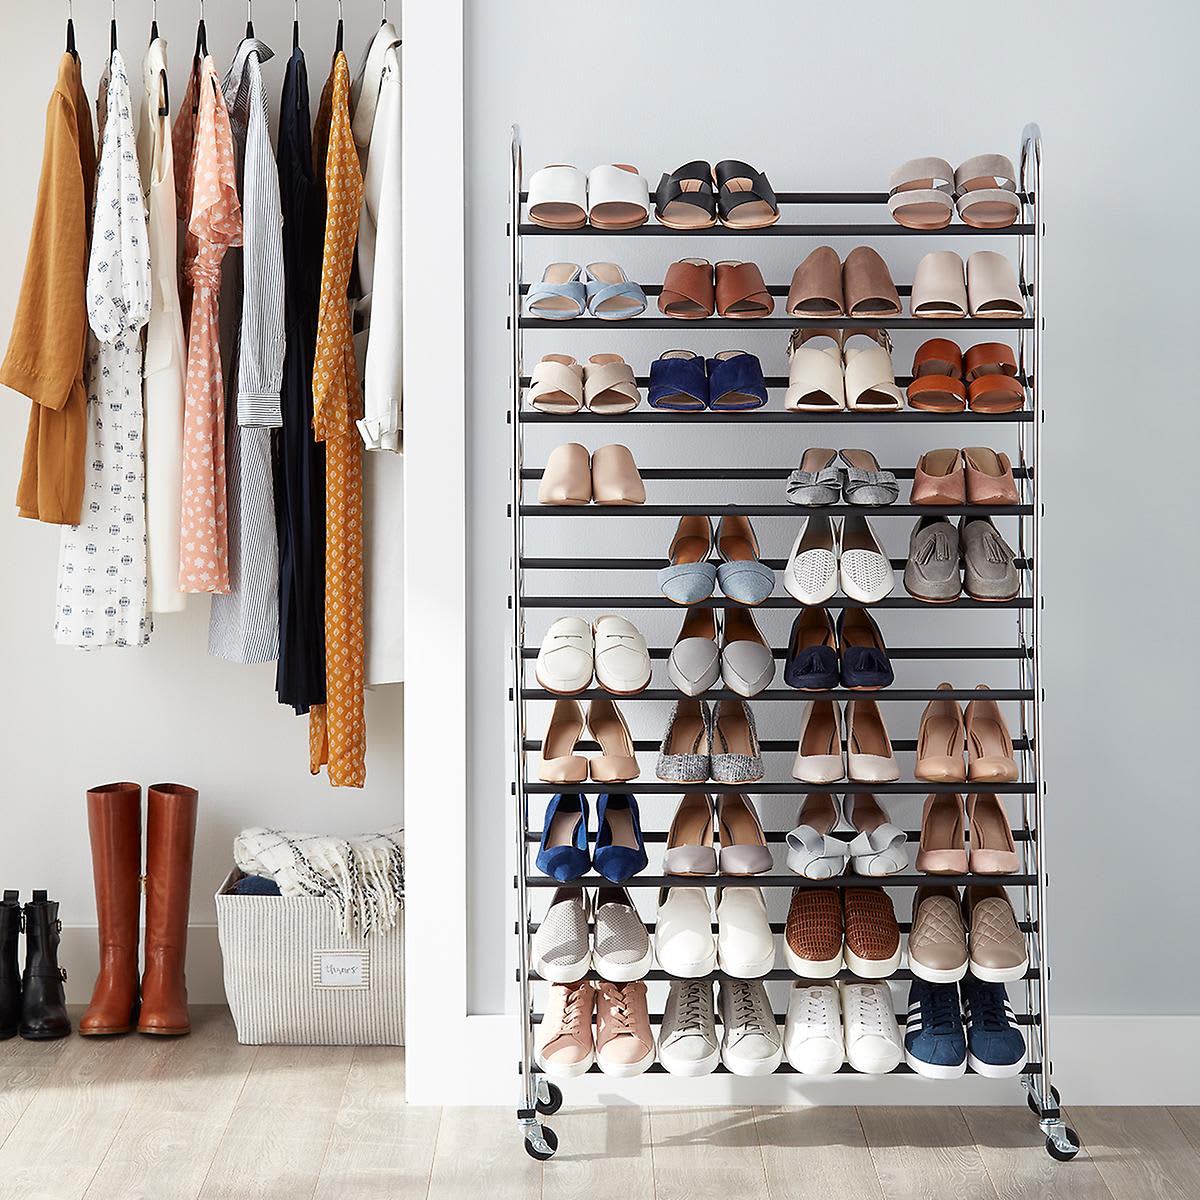 Best shoe storage solutions at home - Ideas by Mr Right